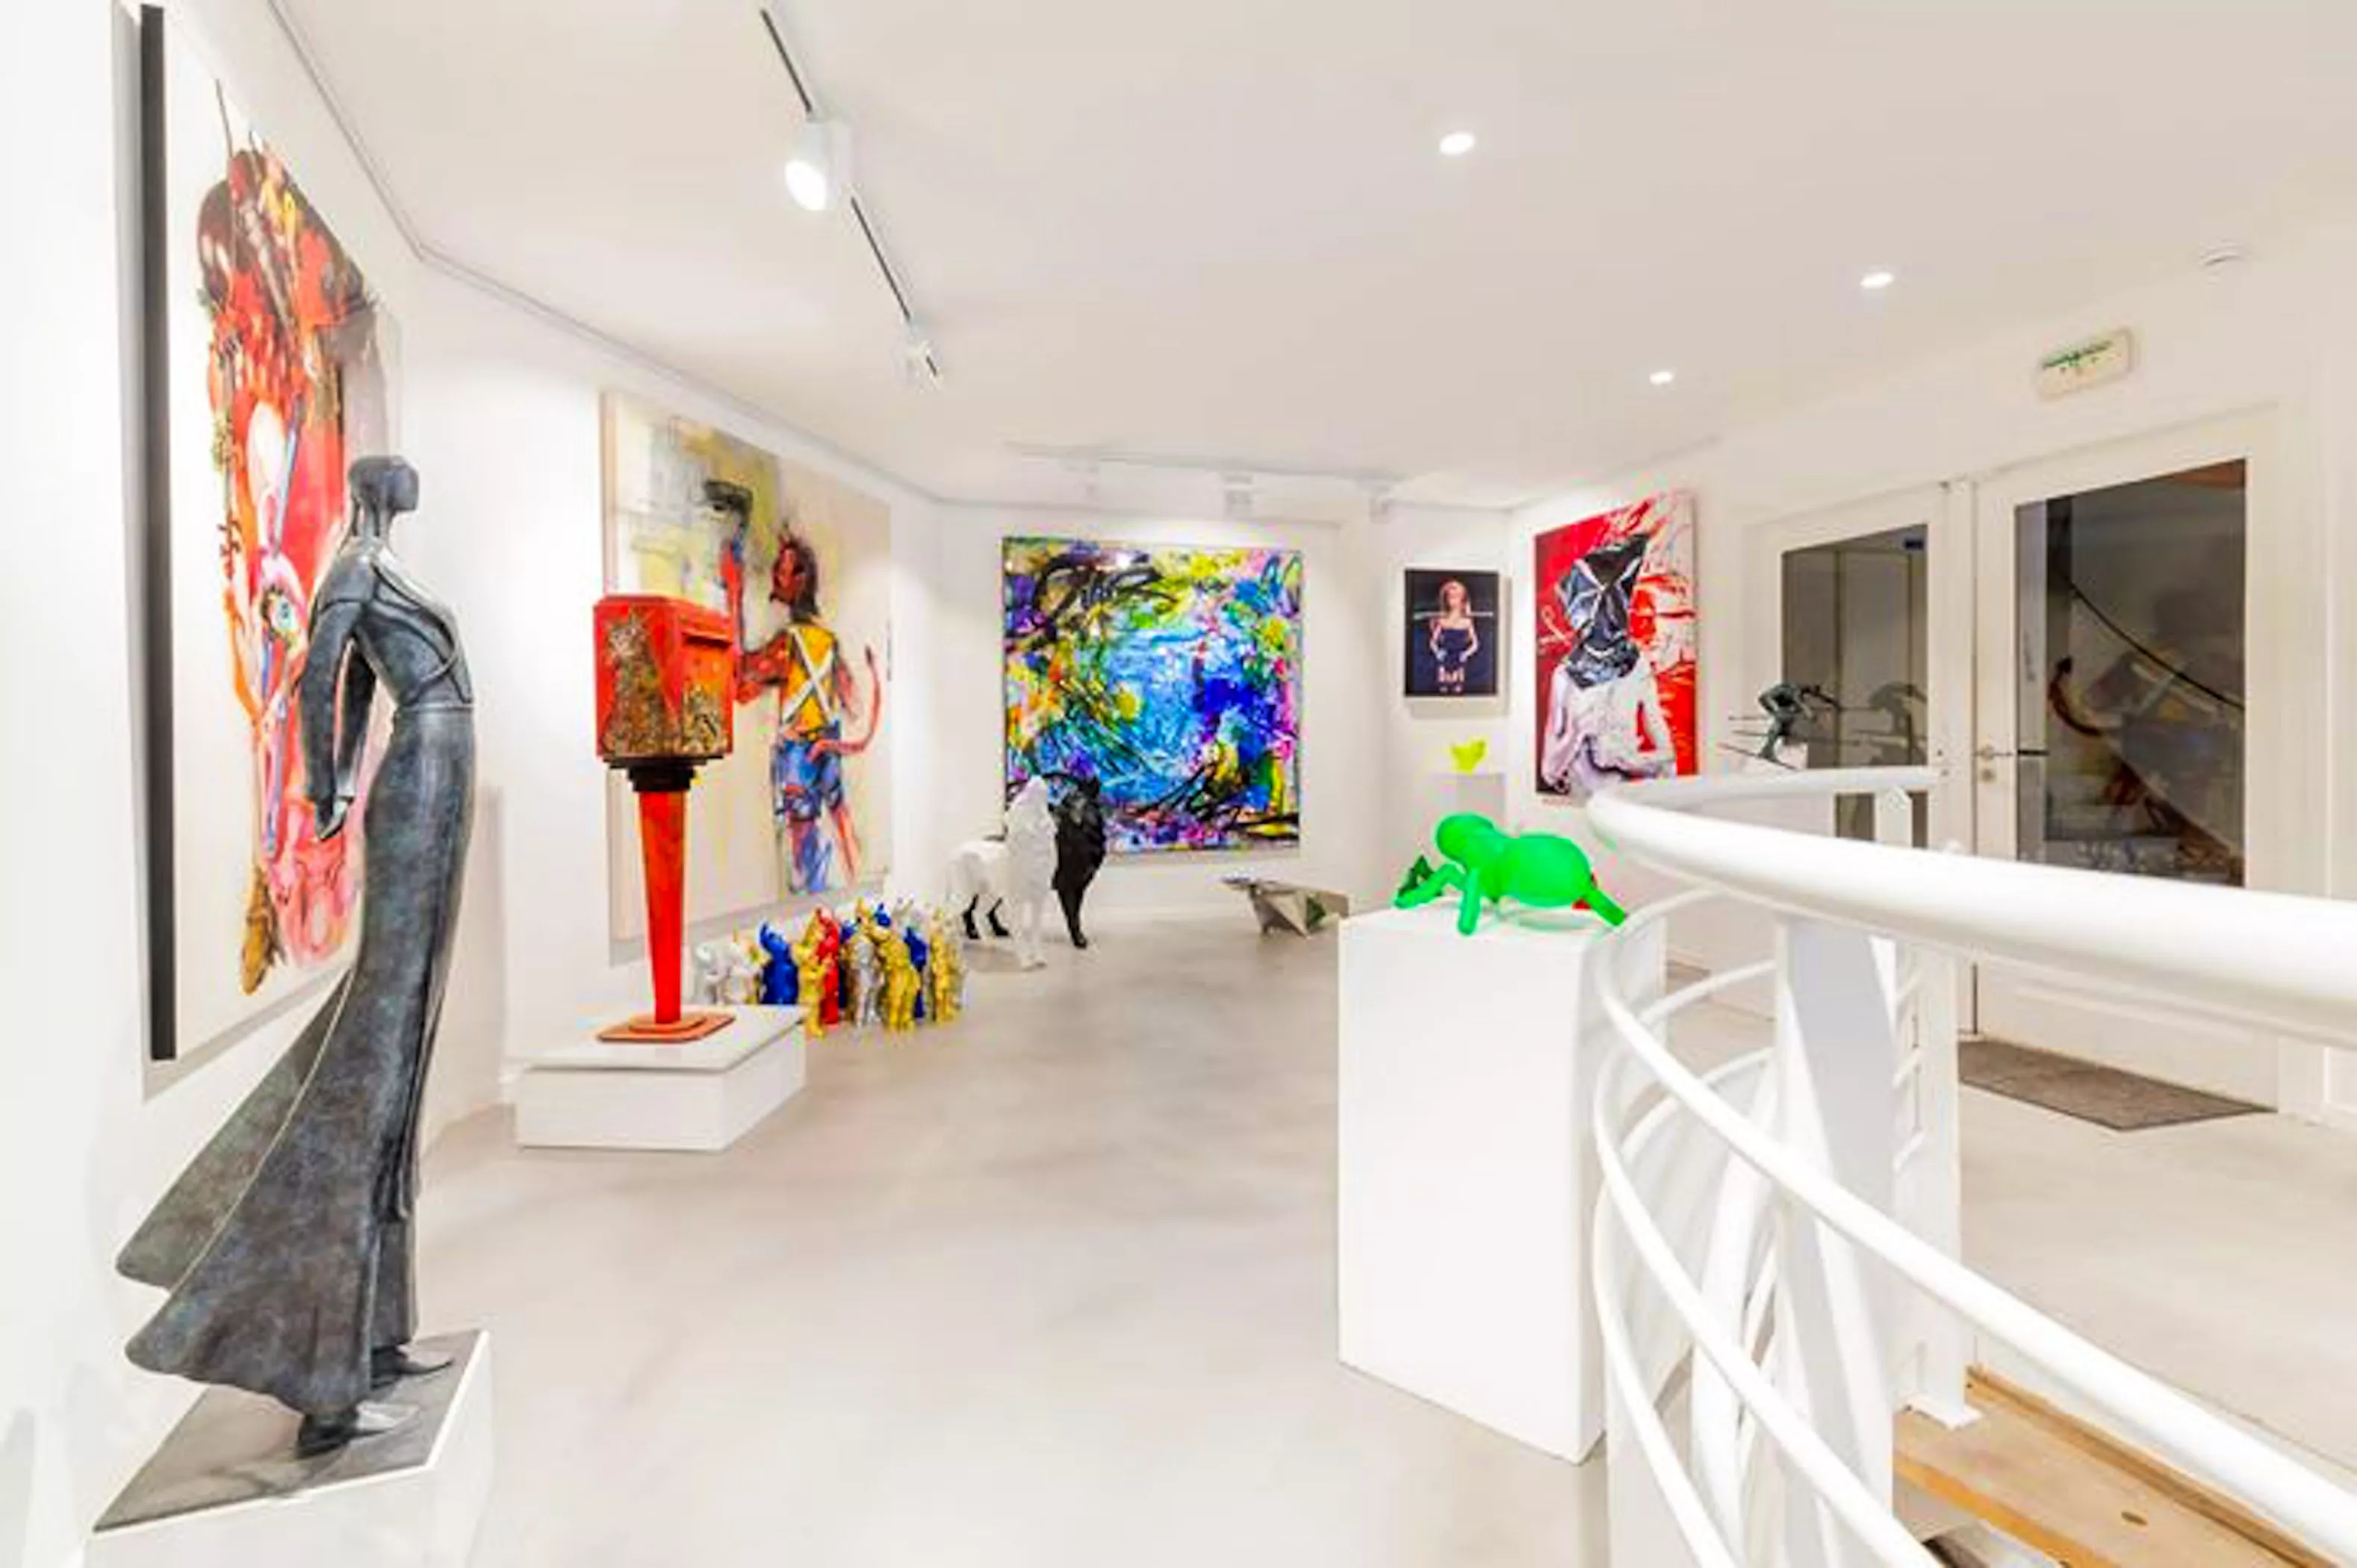 Galerie Jane Griffiths in France, europe | Art - Rated 5